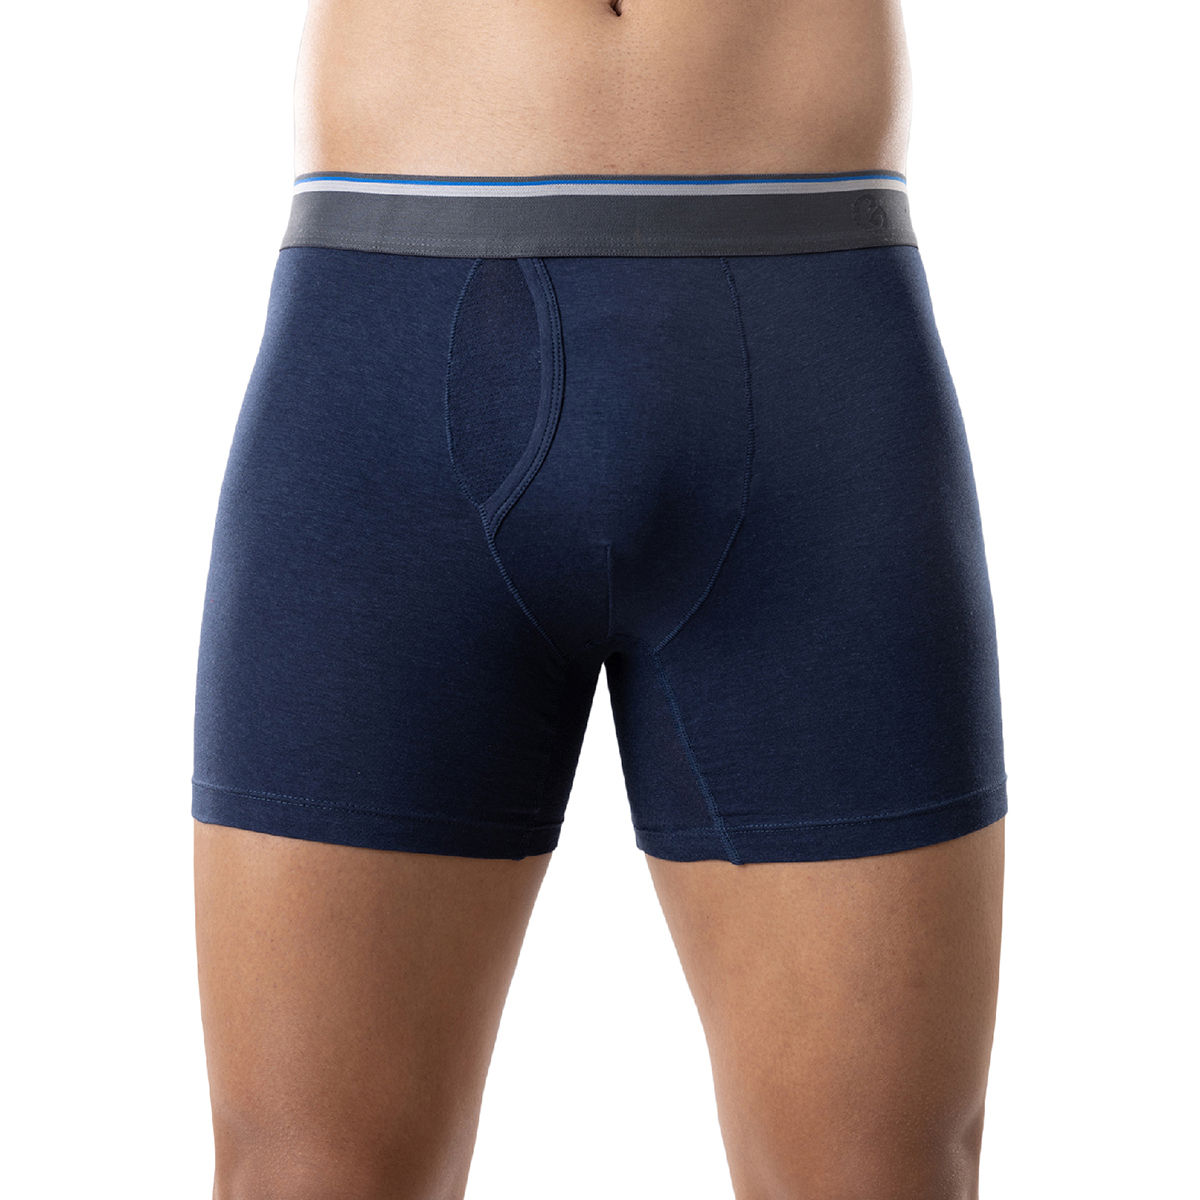 Buy GLOOT Anti Odor Cotton Tencel Cooling Boxer Brief-Dress Blues -  GLUCTOEBB01 Online